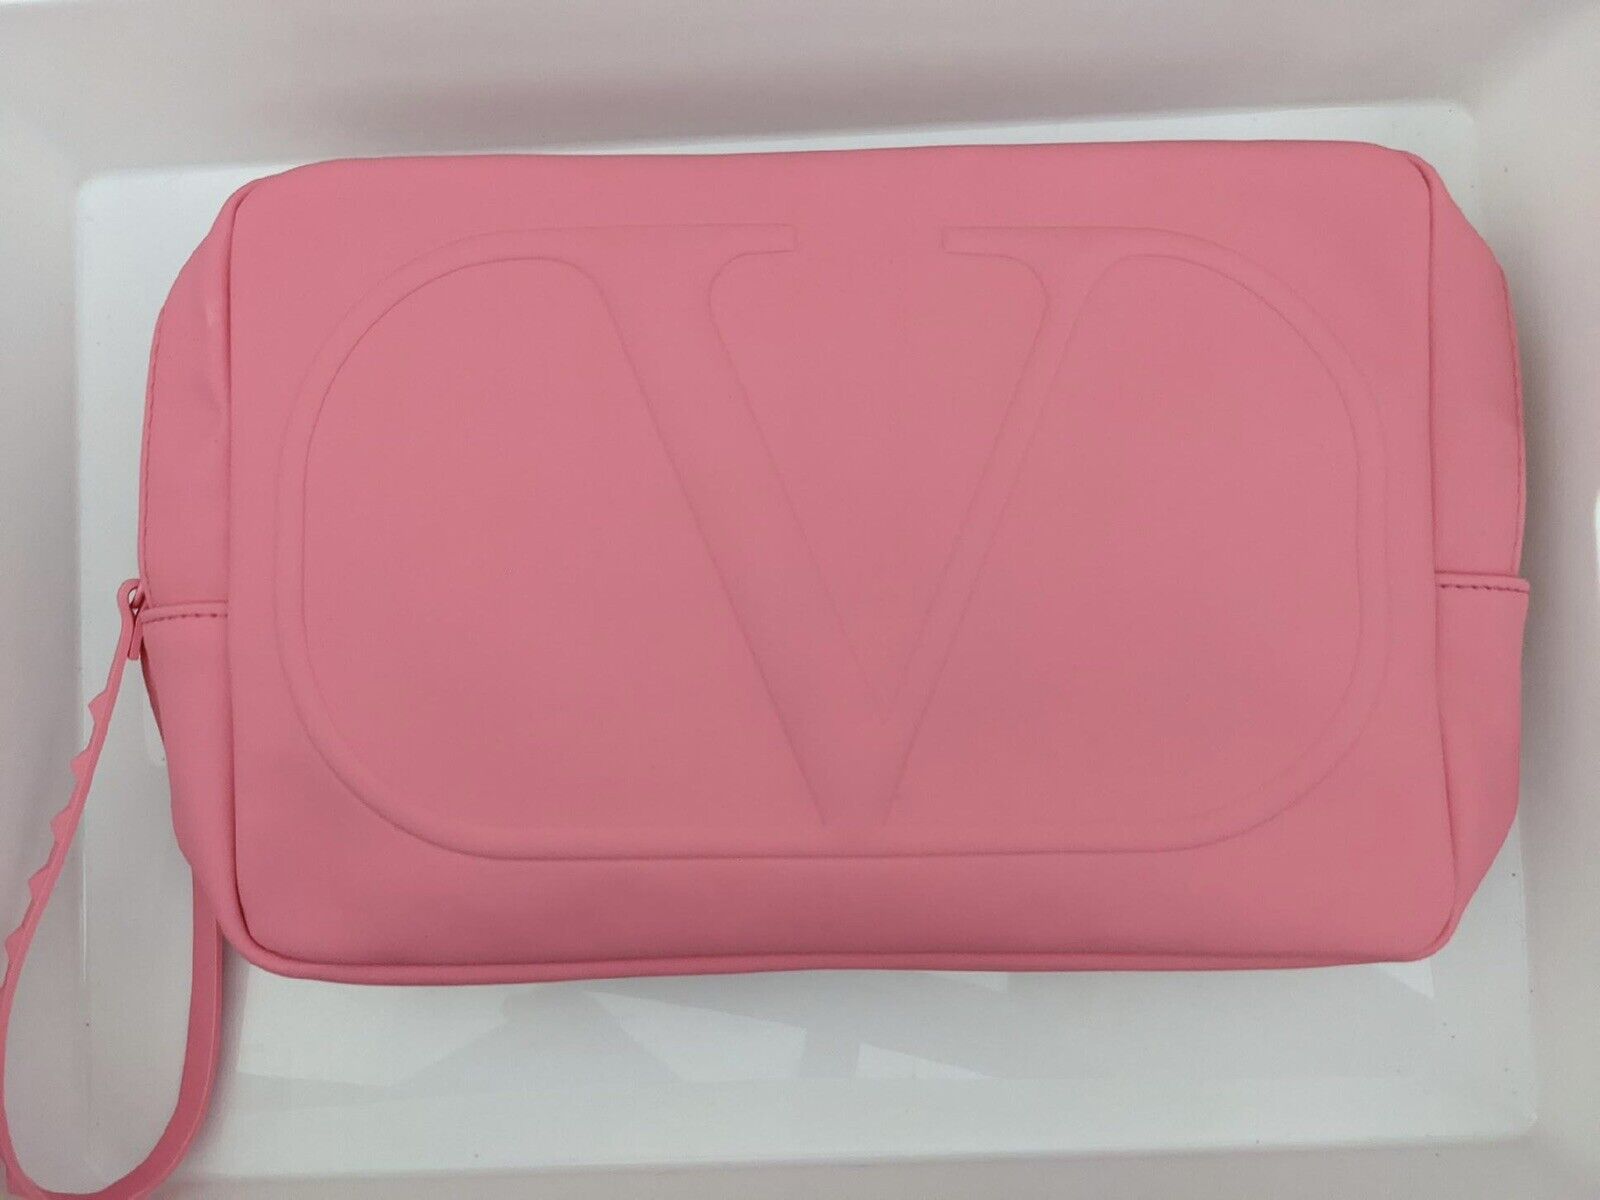 Valentino Beauty Pink Makeup Pouch Bag Toiletry Case Makeup Travel Size